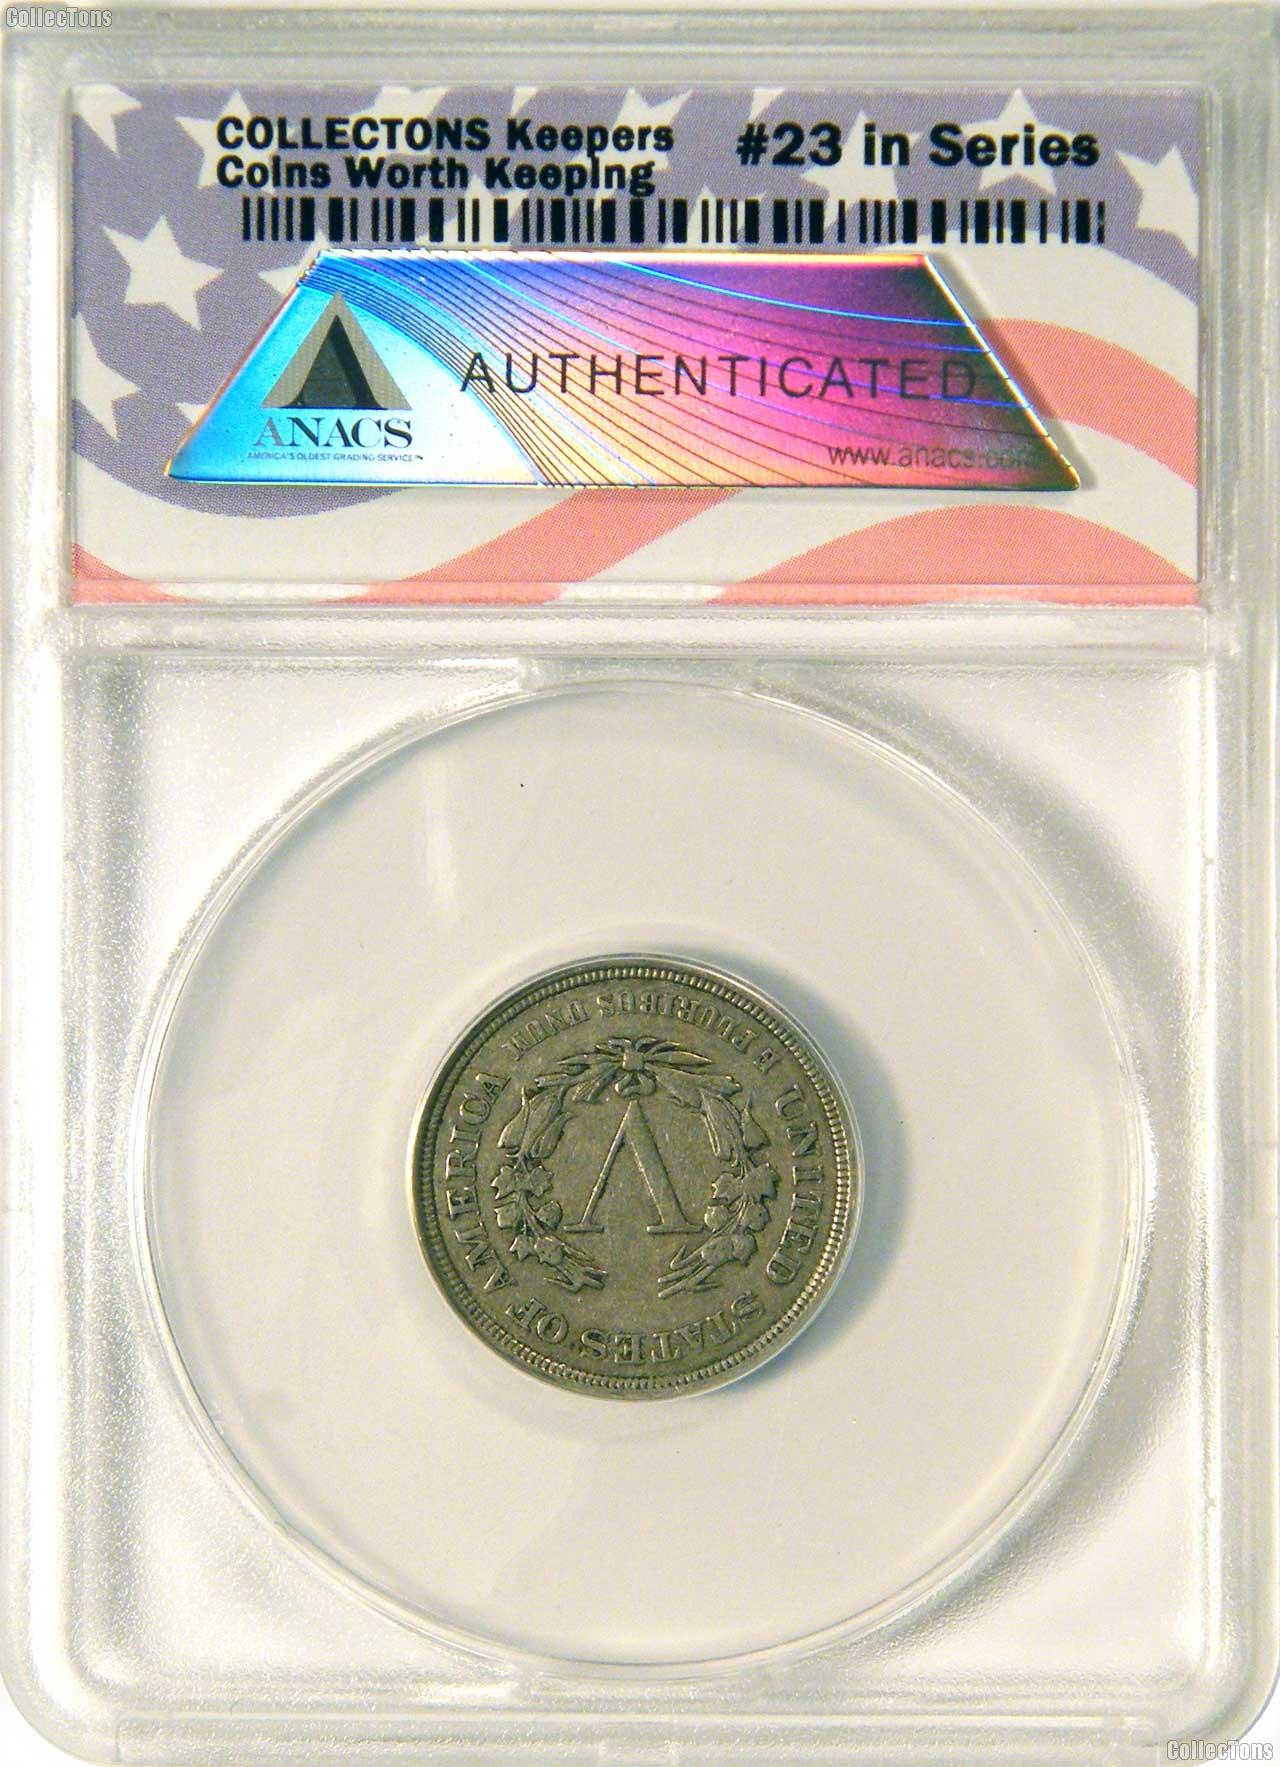 CollecTons Keepers #23: 1883 “NO CENTS” Liberty Head Nickel Certified in Exclusive ANACS Holder